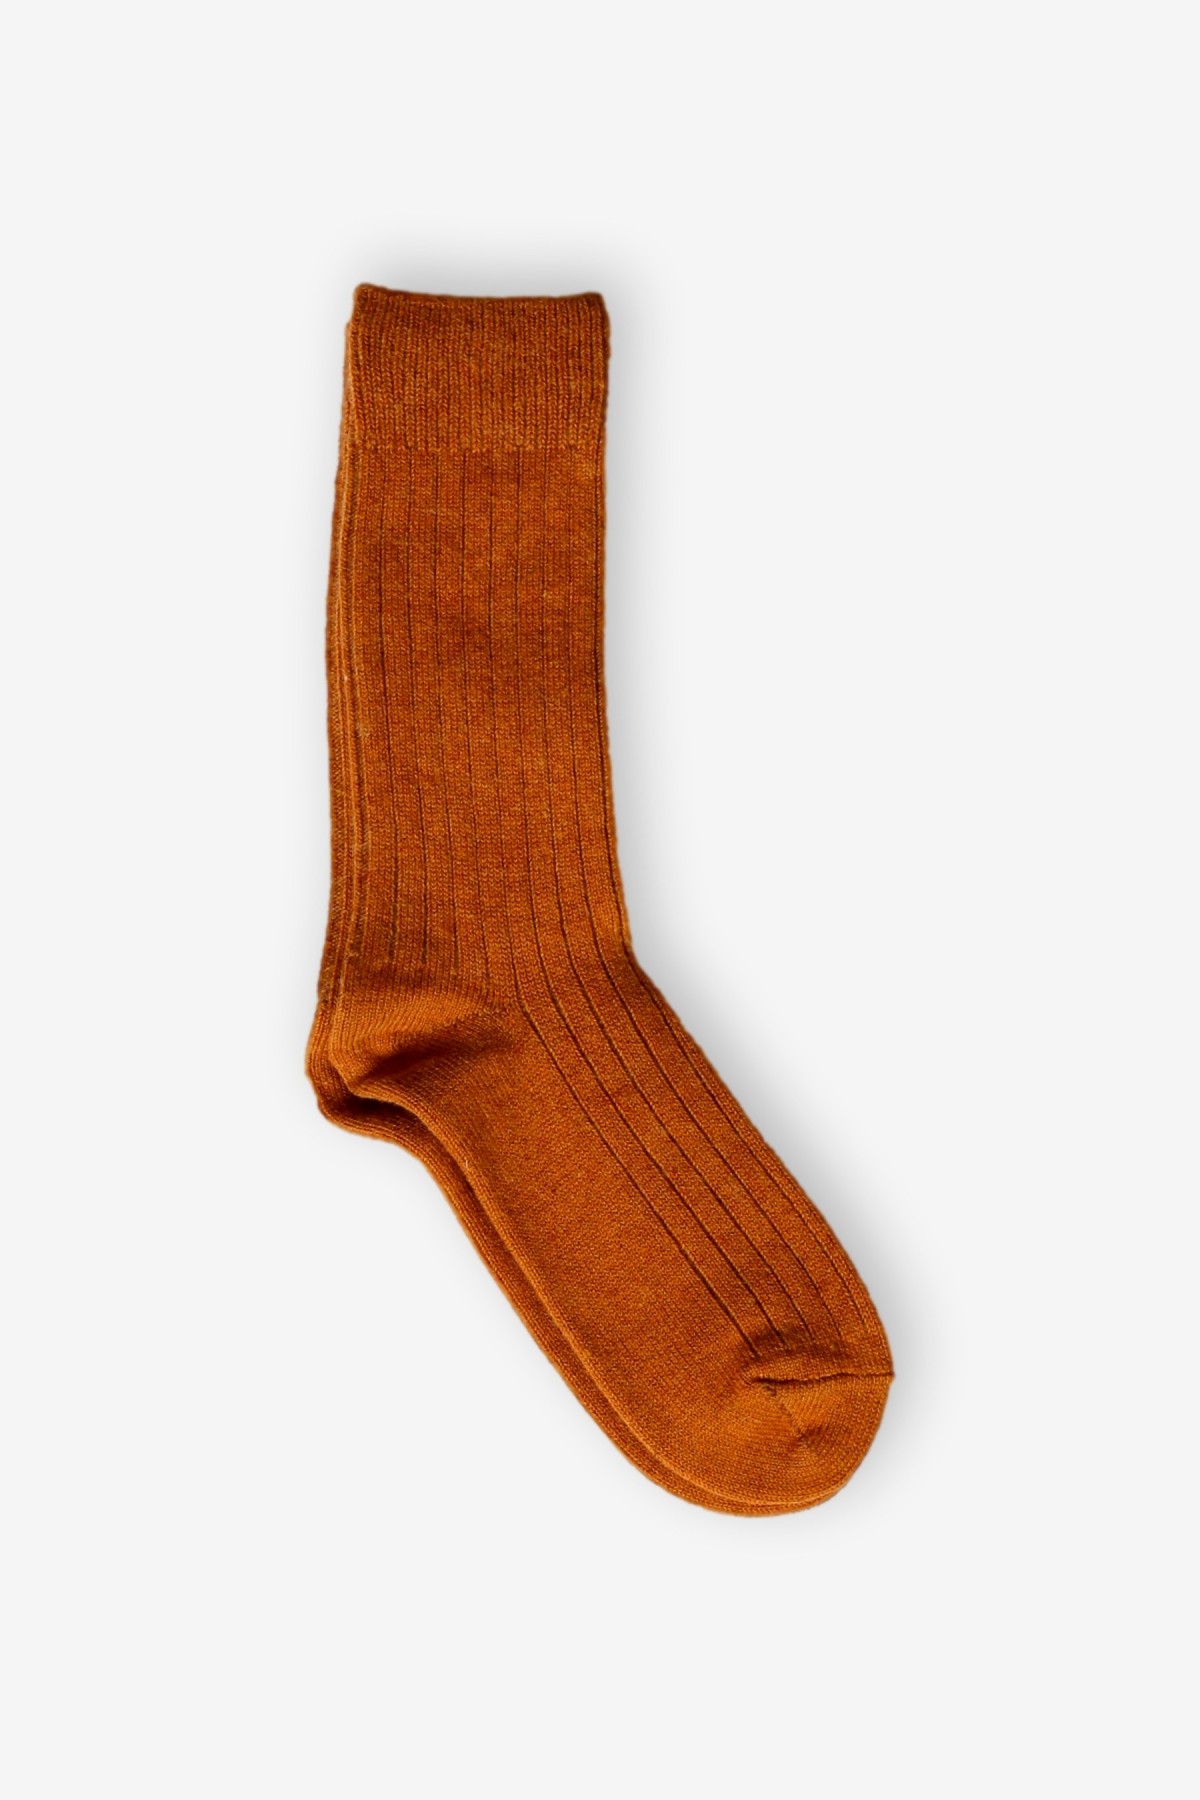 RoToTo Cotton Wool Ribbed Socks in Gold